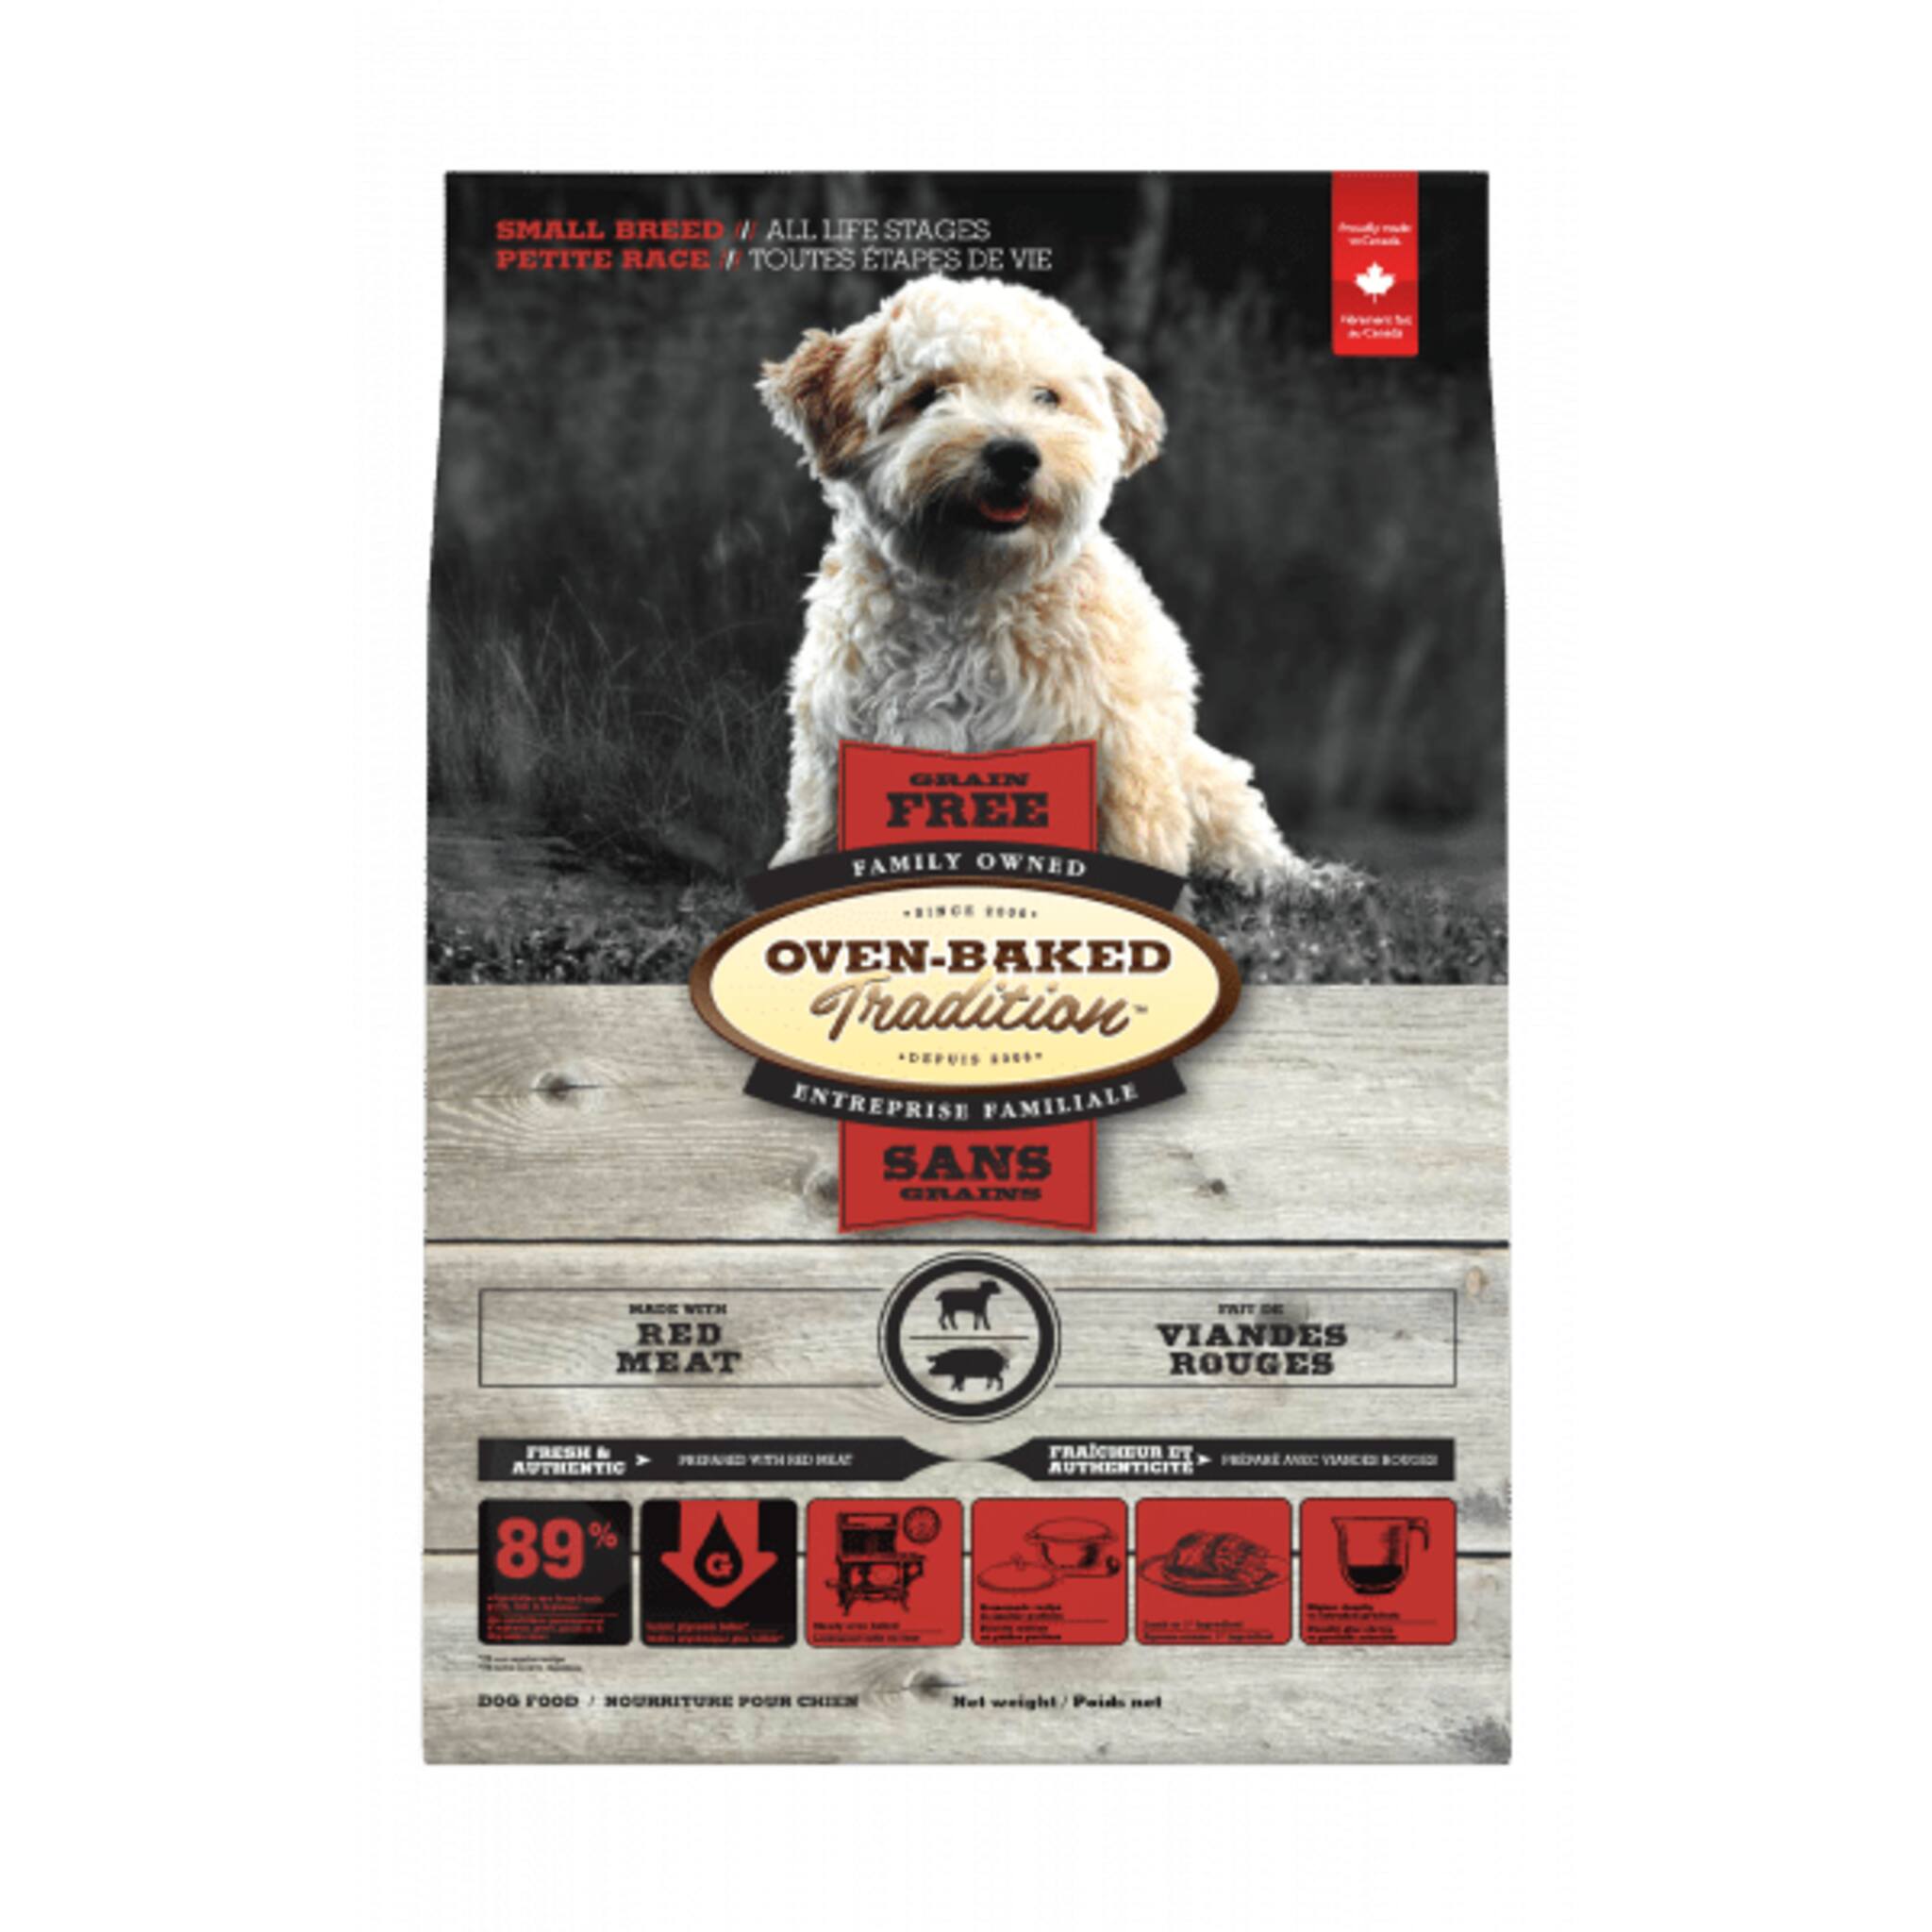 A bag of Oven-Baked Tradition small breed dog food, red meat recipe, 5 lb.